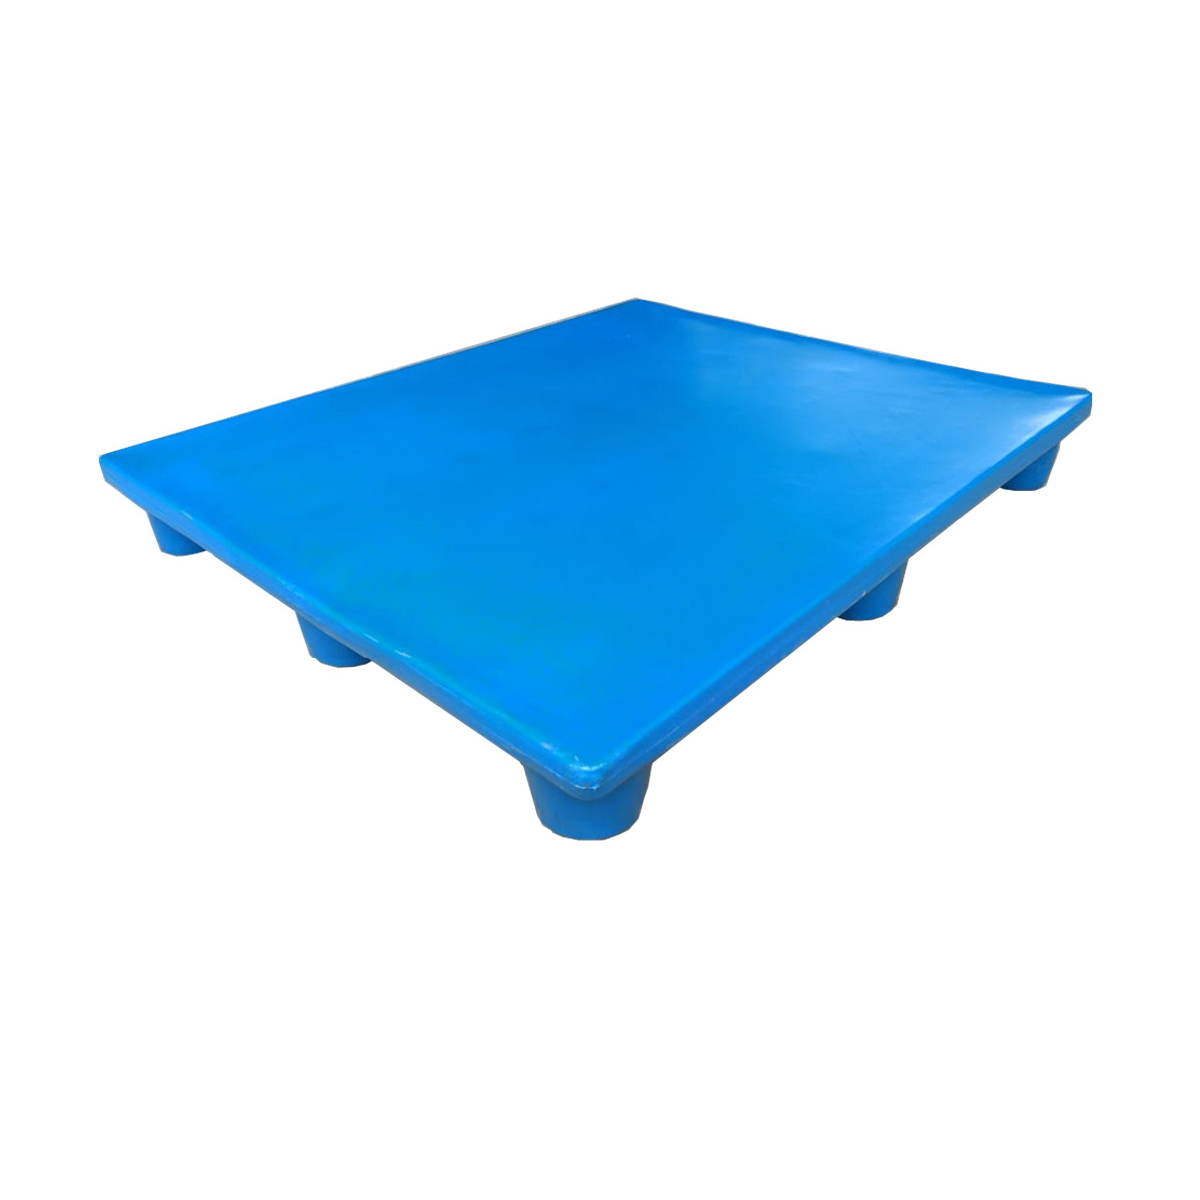 Swift TechnoPlast Roto Moulded Eco Plastic Pallet 4 Way Non-Reversible Steel Reinforced Plain Top 1200 x 1000 x 150mm (Pack of 5)